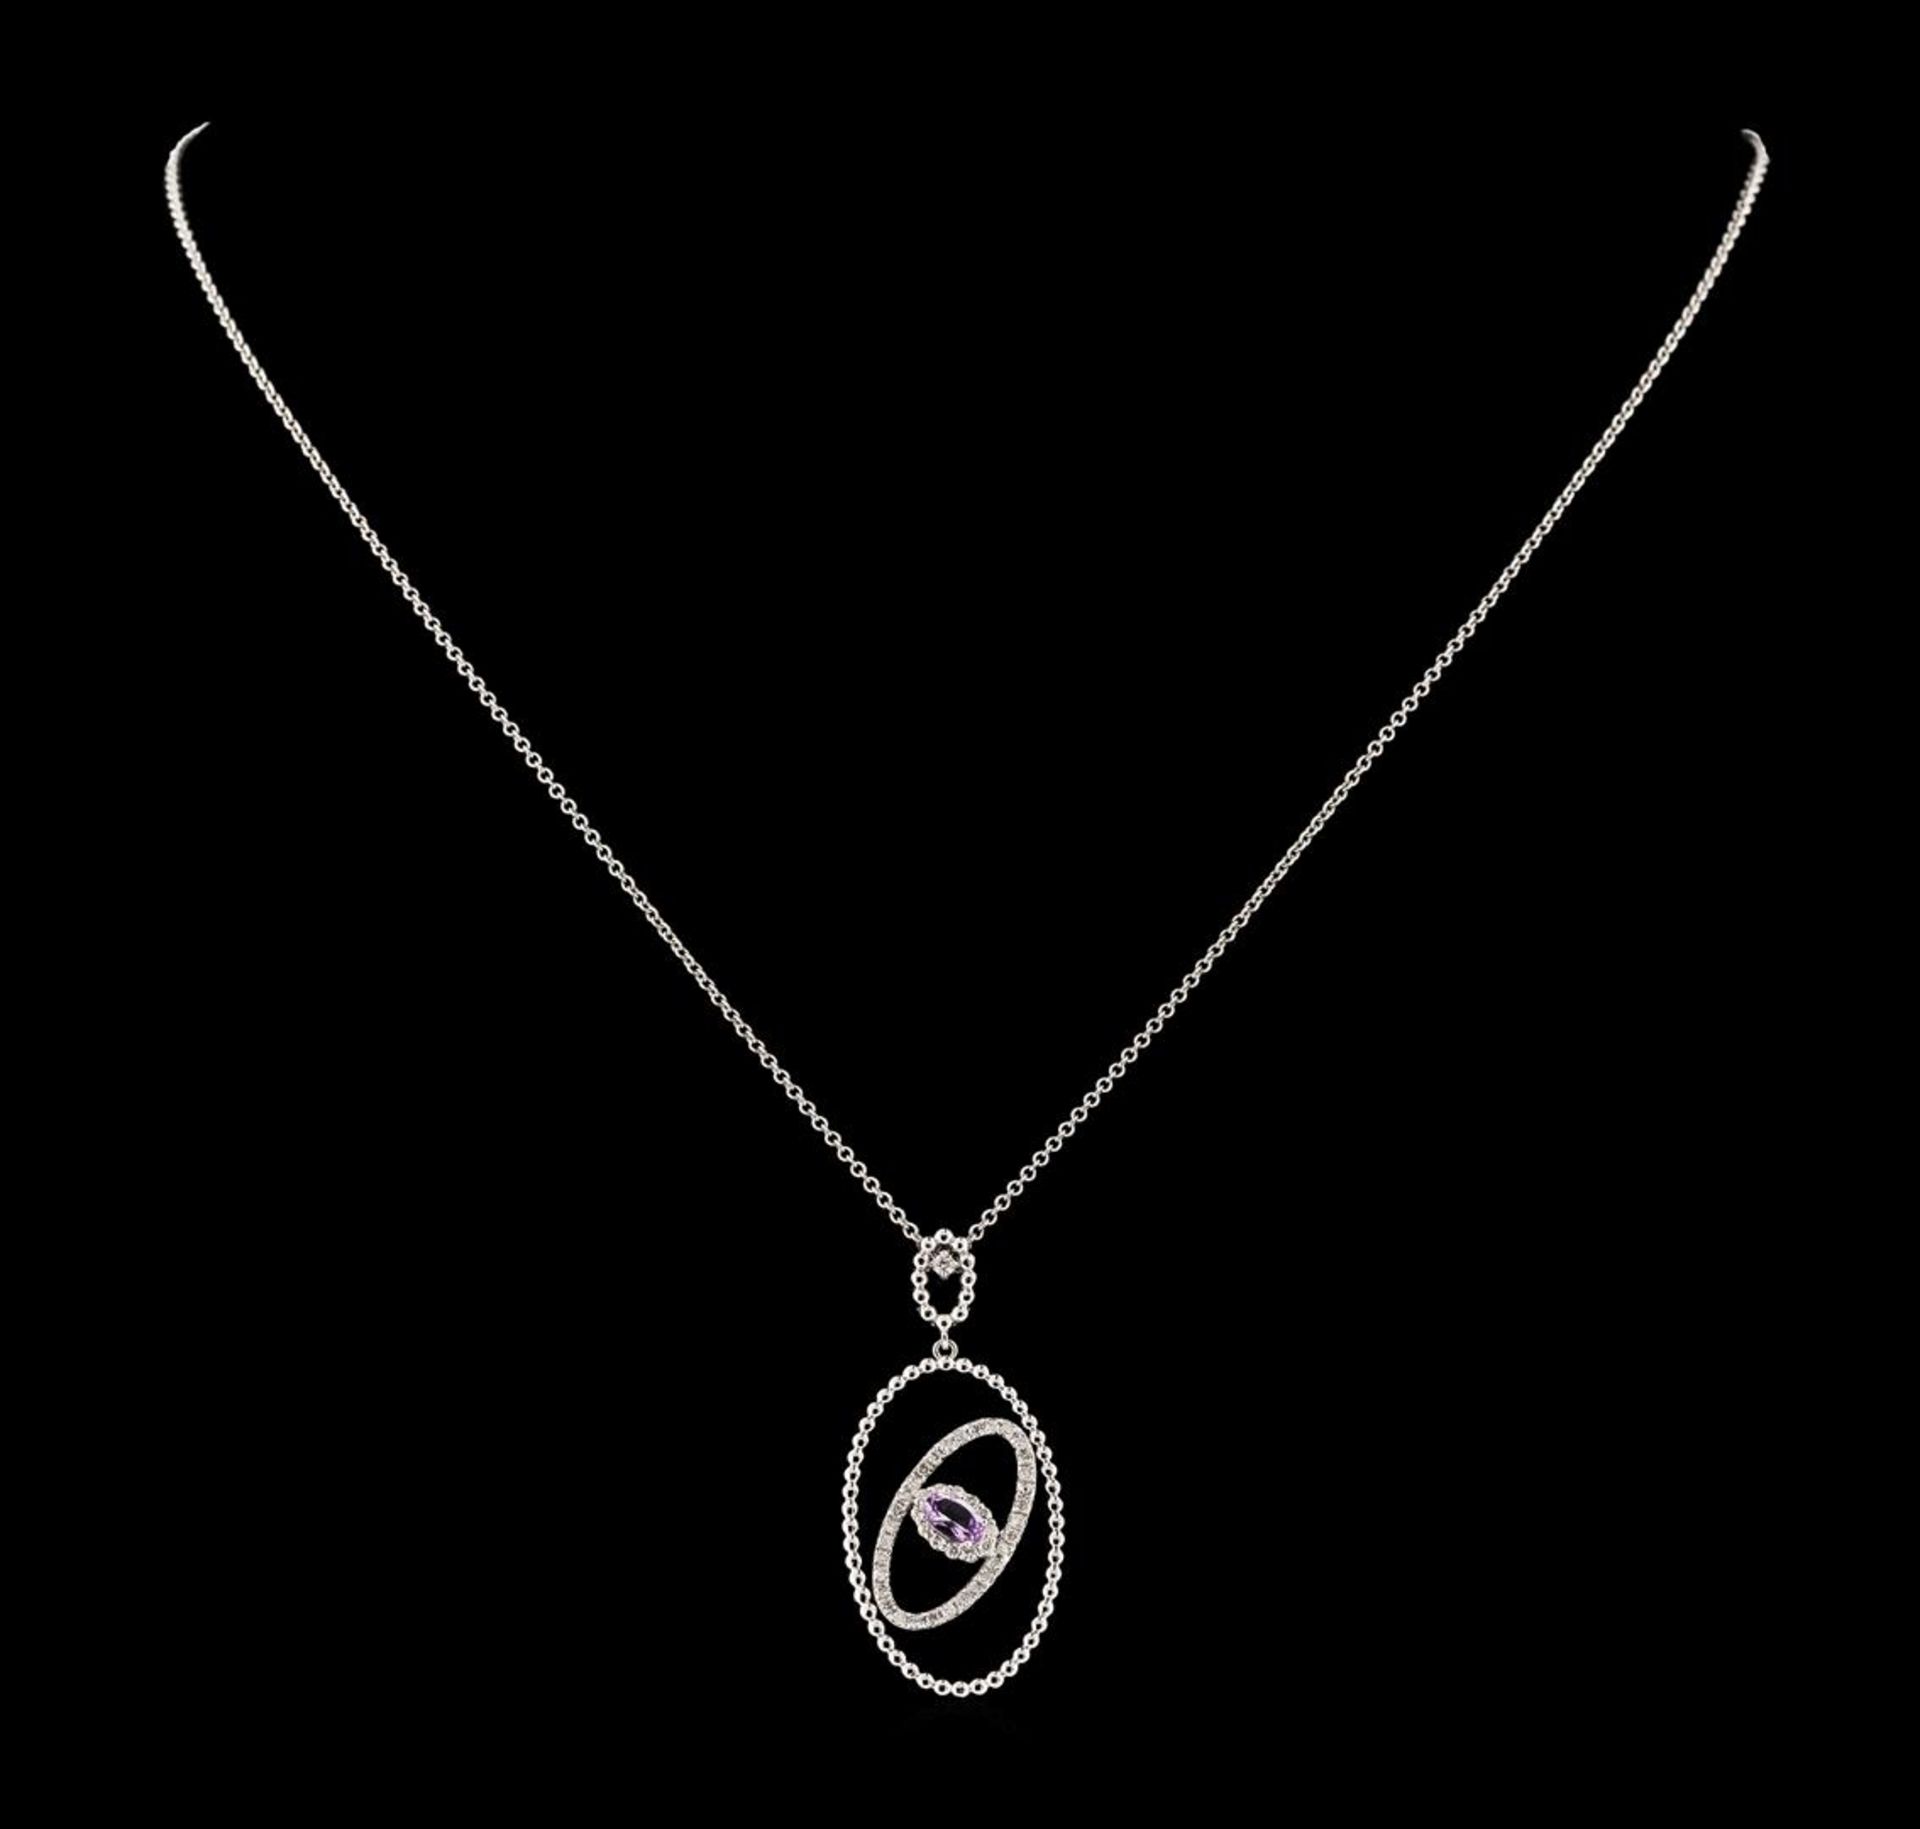 0.25 ctw Morganite and Diamond Pendant With Chain - 14KT White Gold